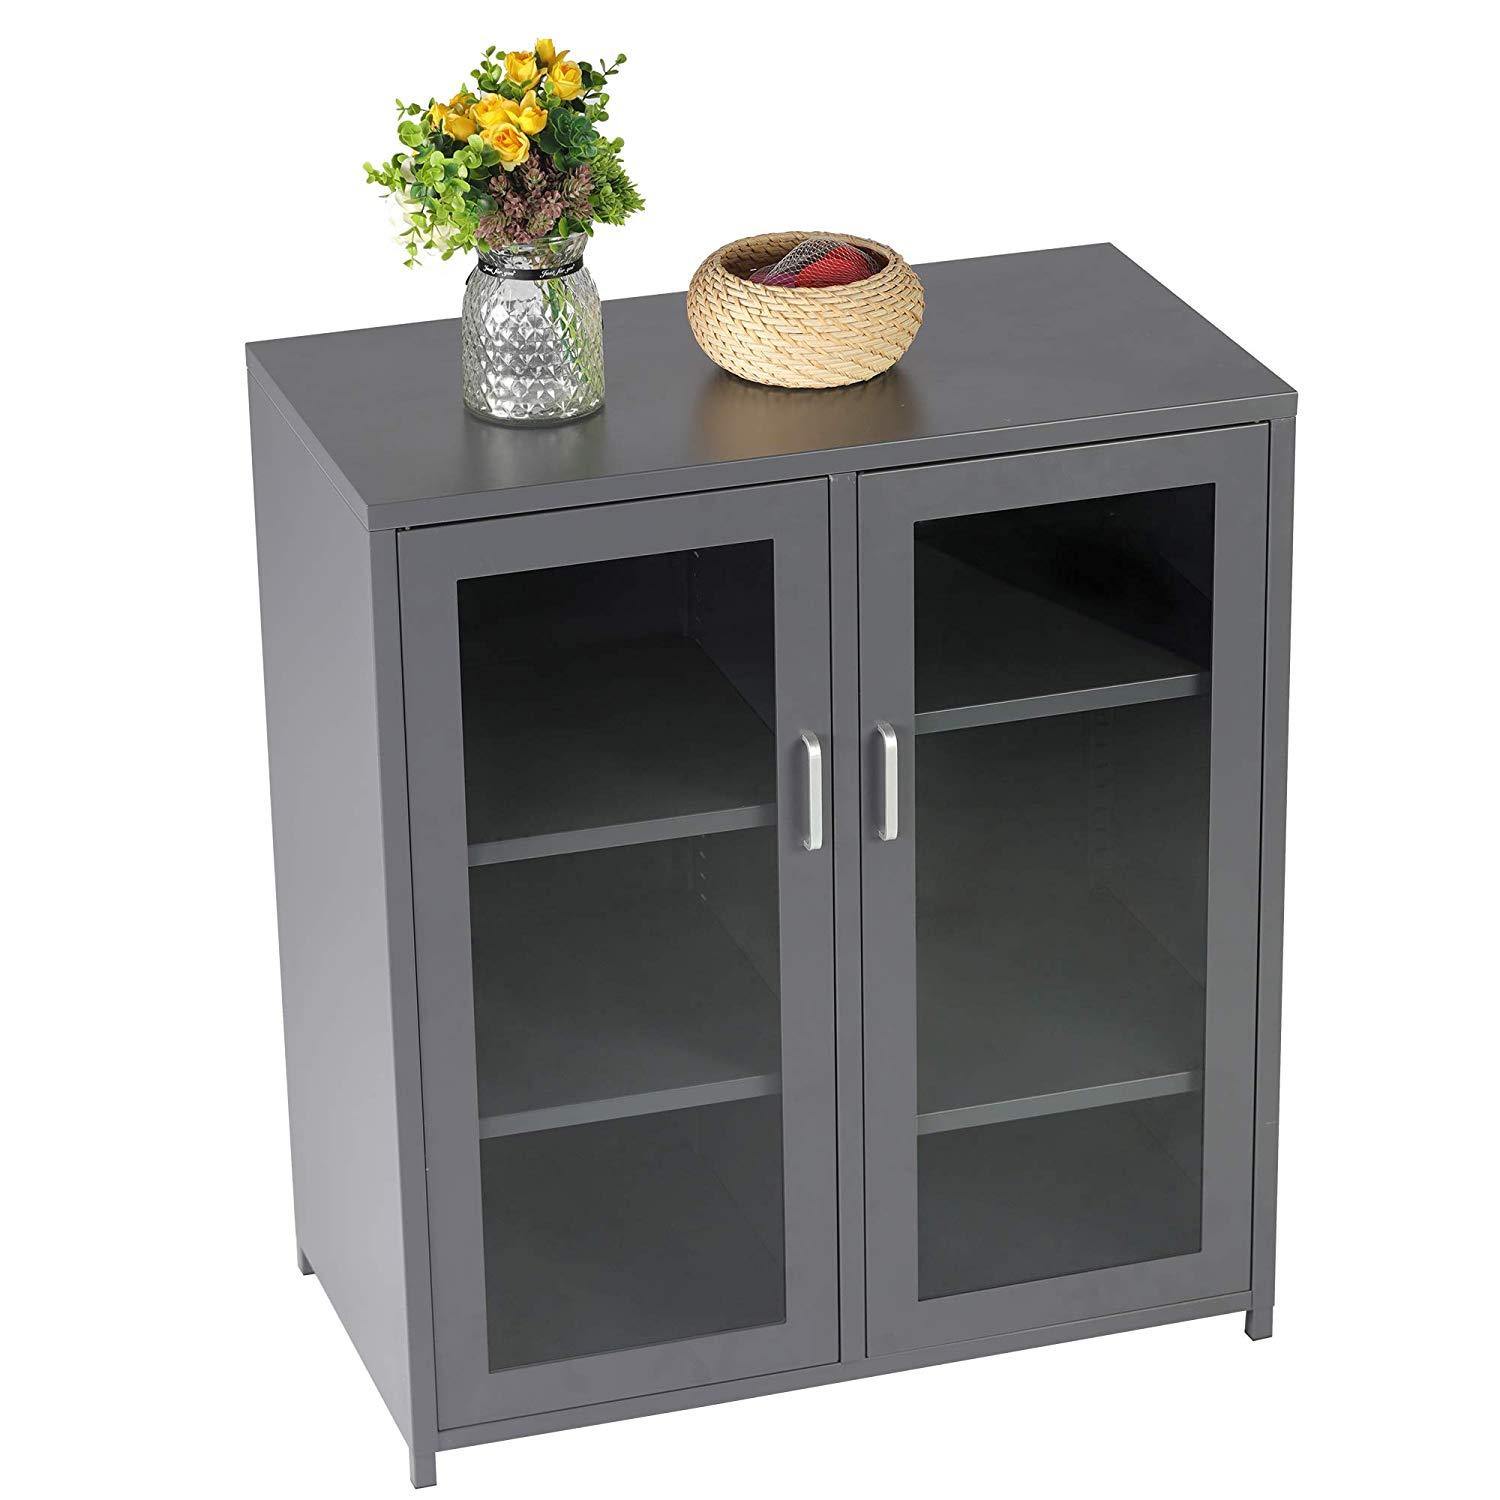 Storage Sideboard Cabinet Sturdy and Durable Floor Storage Cabinet with 4 Adjustable Shelves - Bosonshop